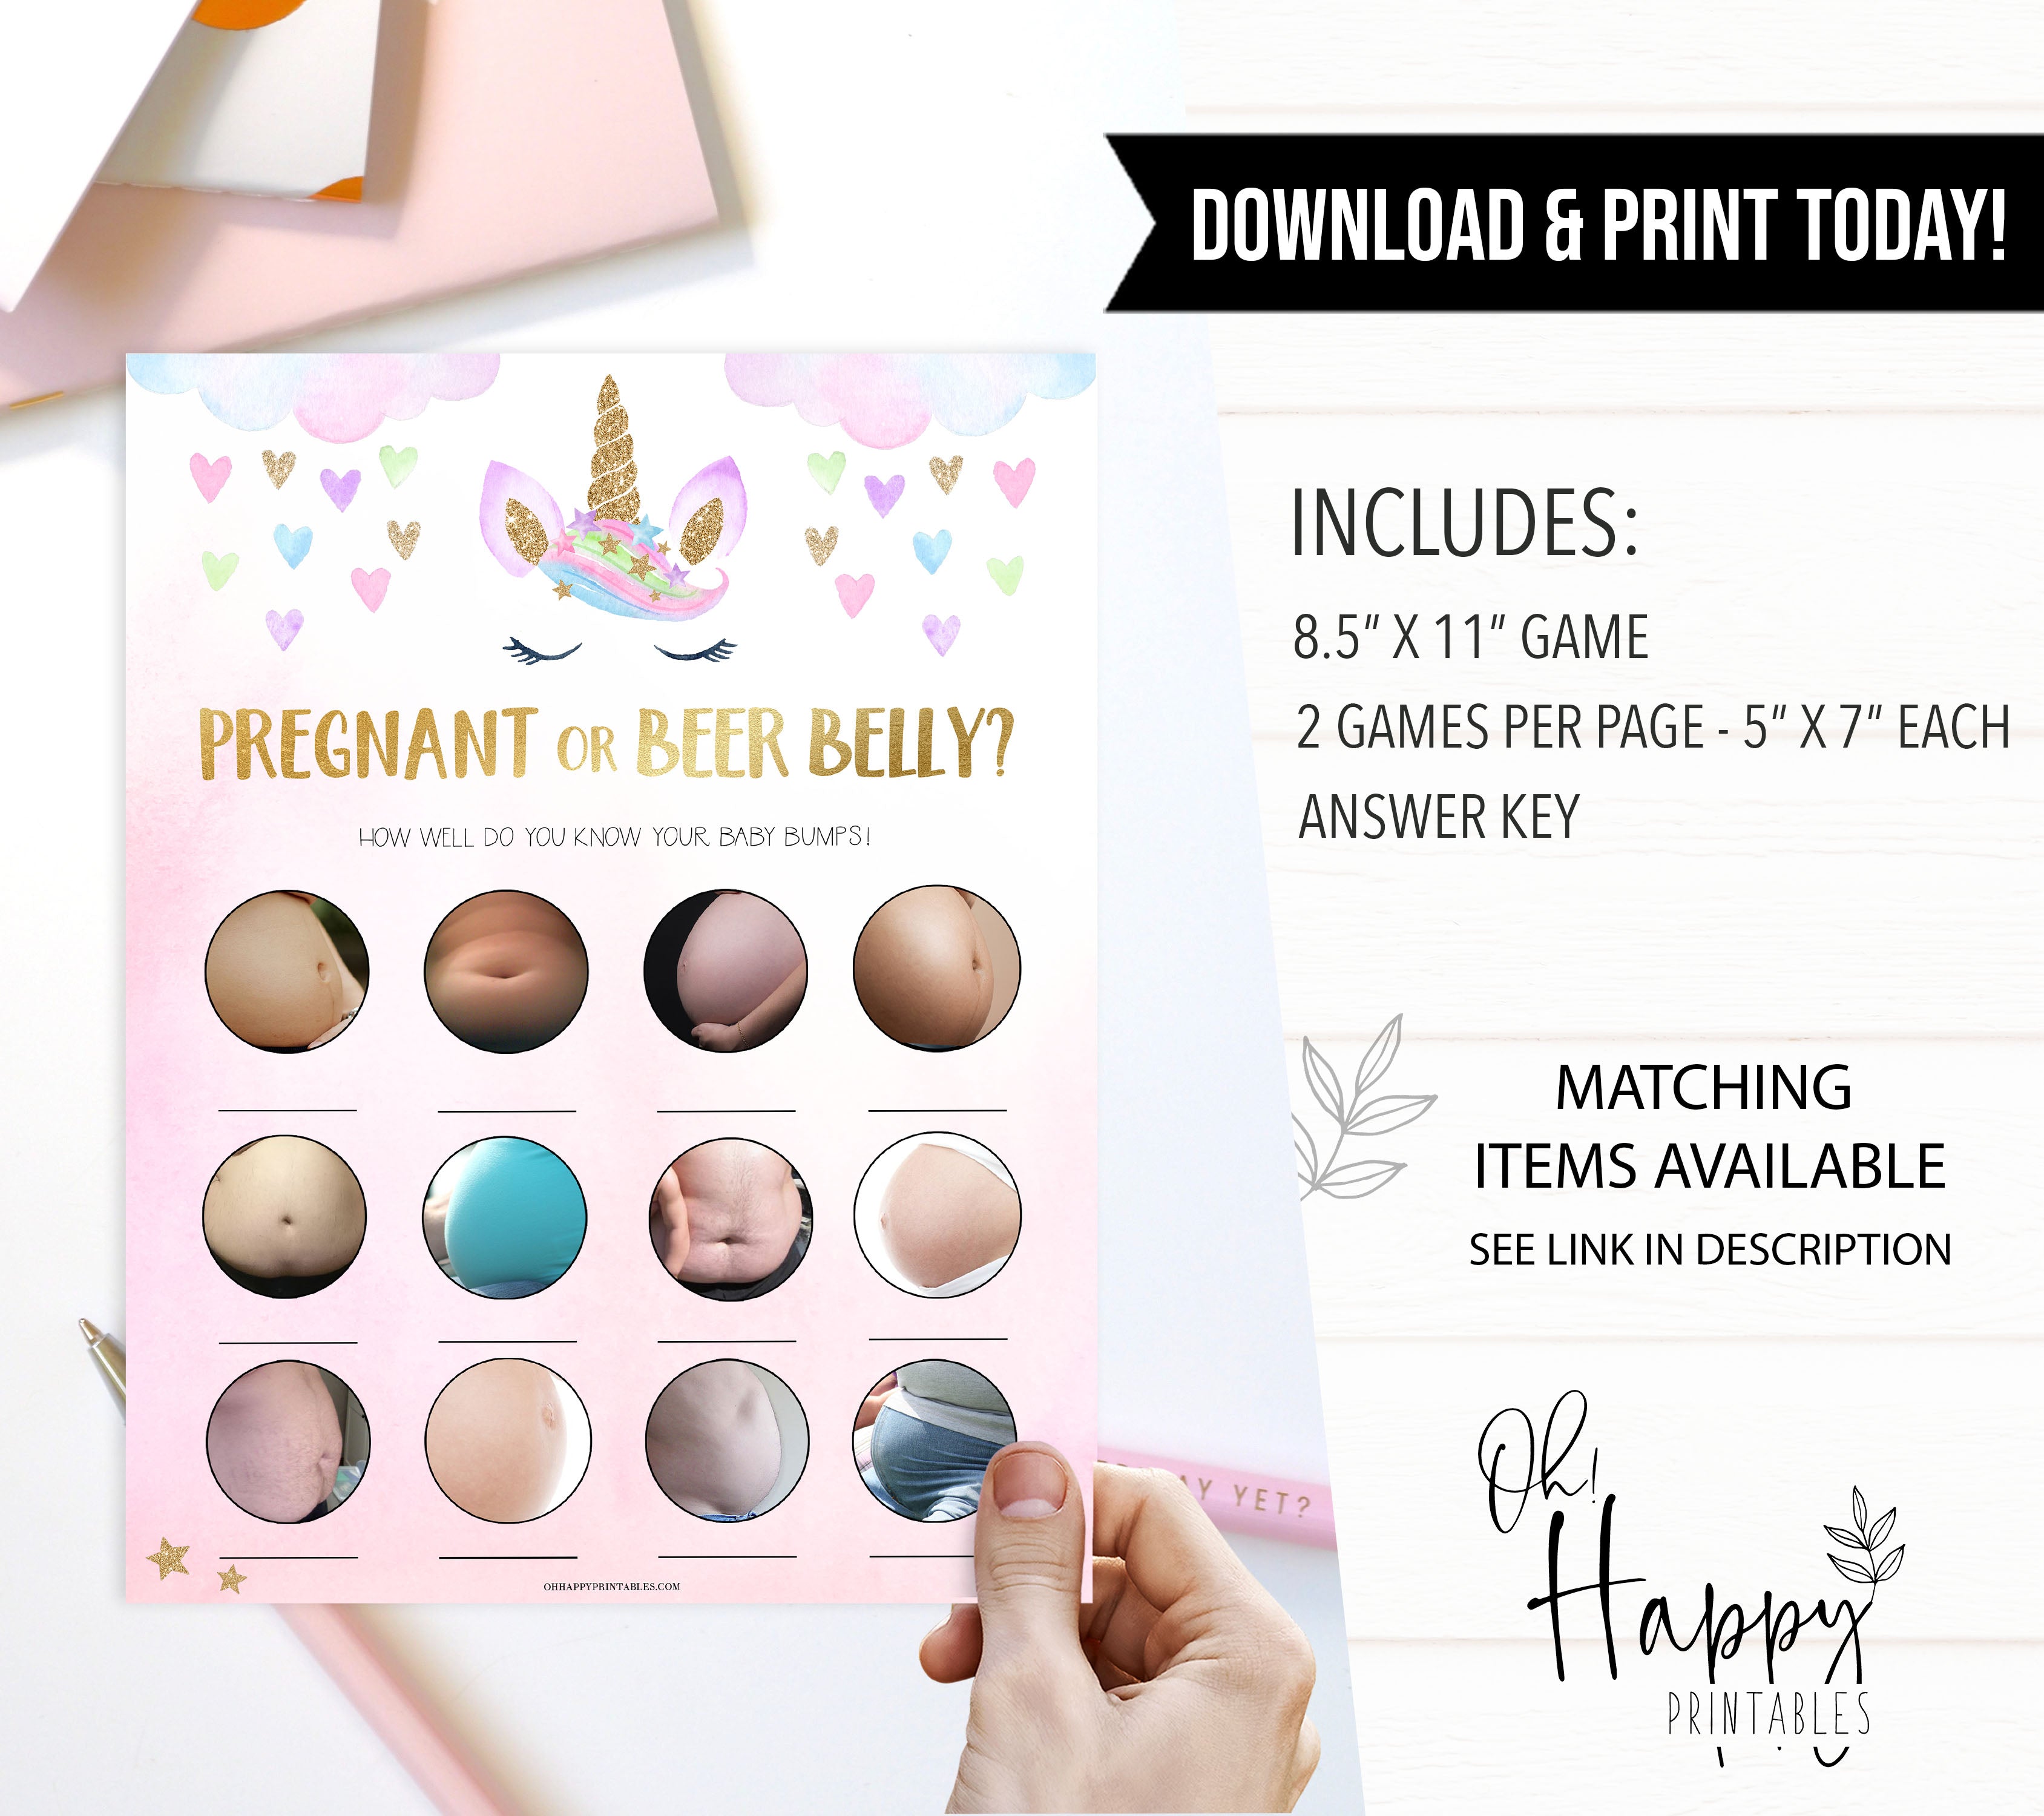 pregnant or beer belly game, Printable baby shower games, unicorn baby games, baby shower games, fun baby shower ideas, top baby shower ideas, unicorn baby shower, baby shower games, fun unicorn baby shower ideas